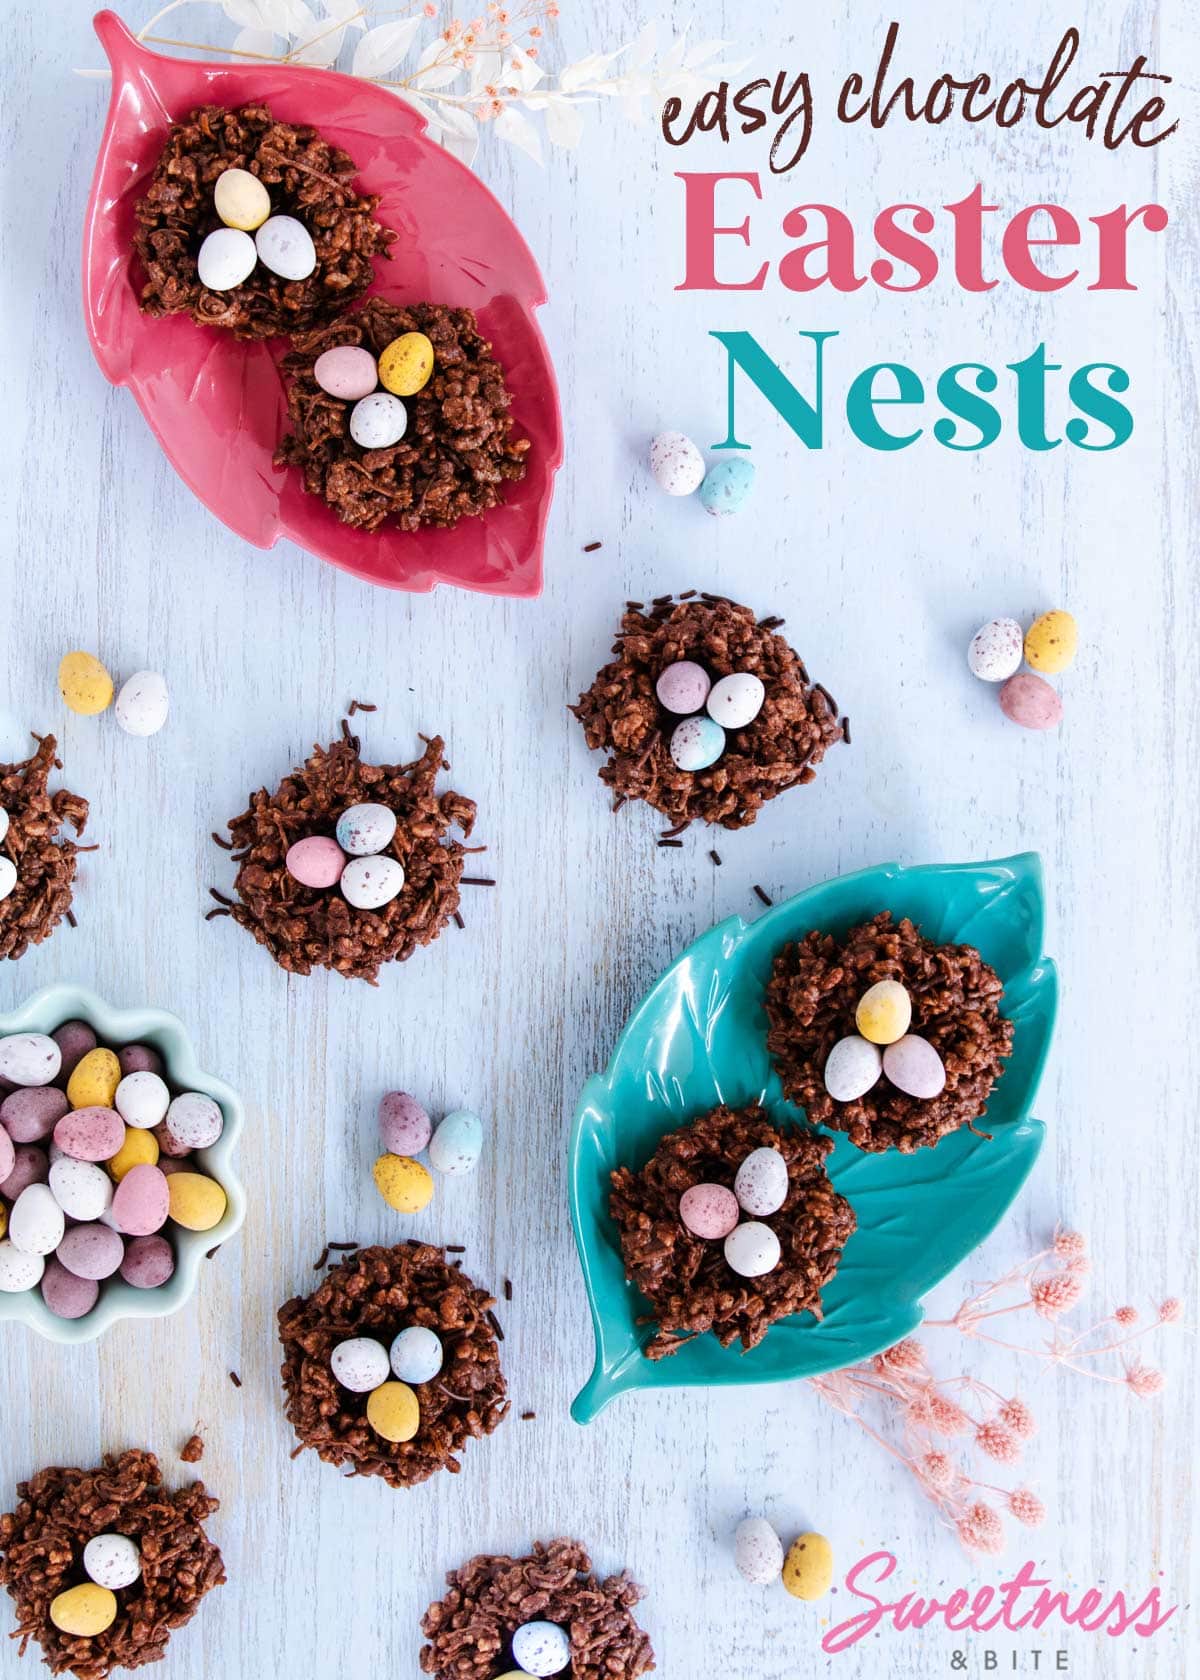 9 chocolate Easter nests, some on leaf-shaped plates, on a blue woodgrain background, surrounded by pastel eggs.